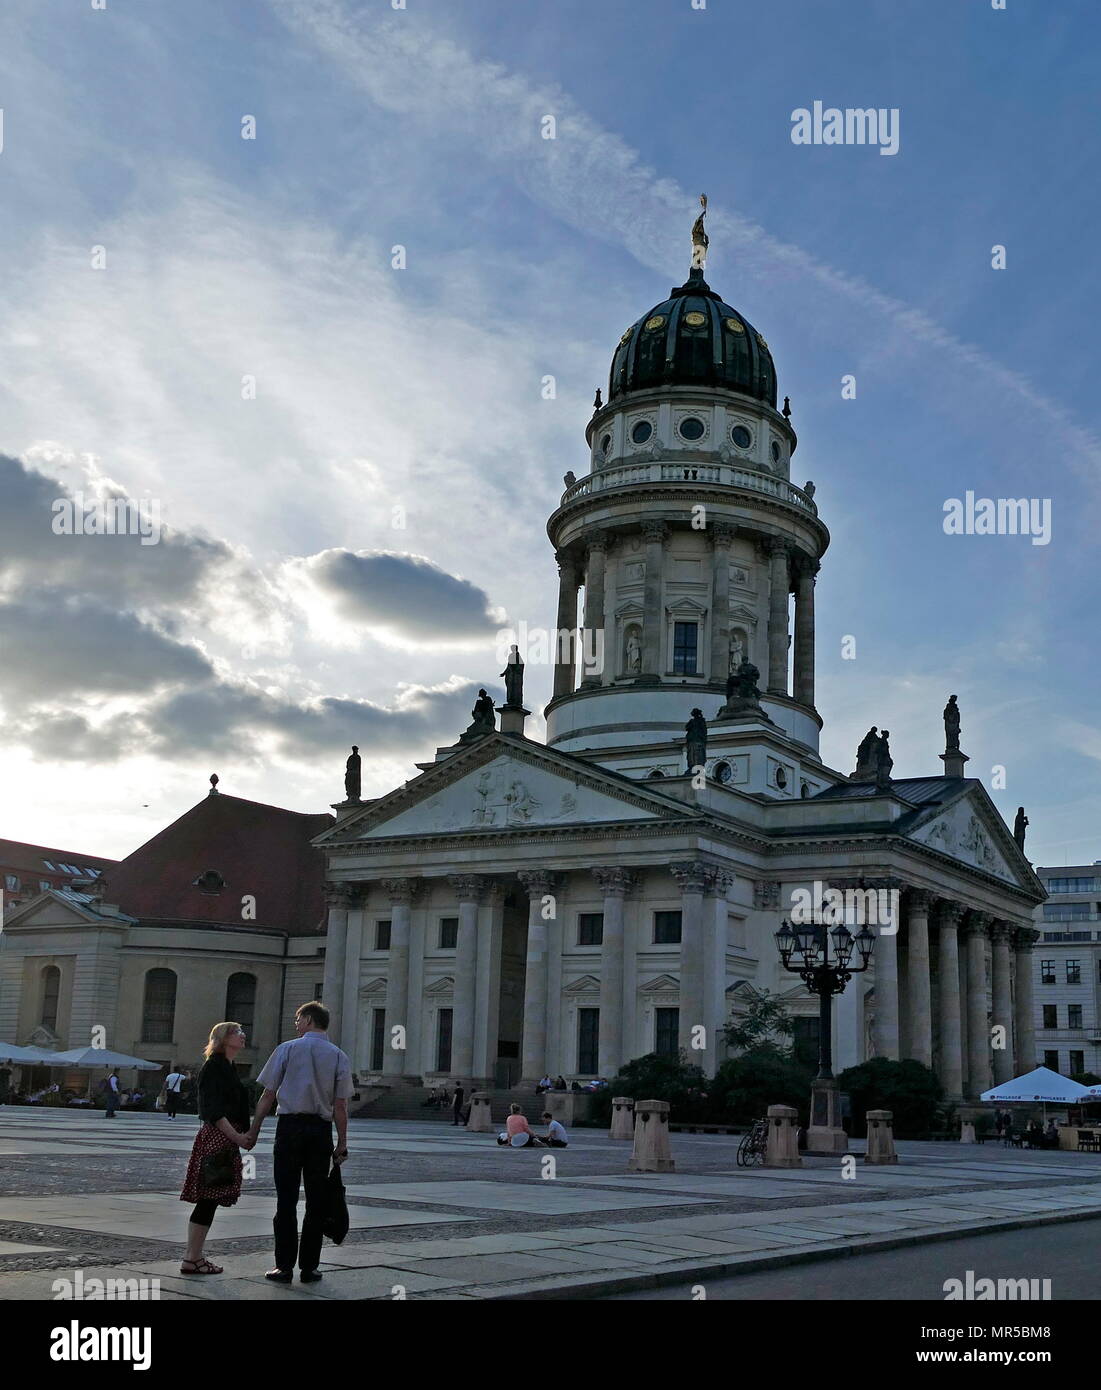 Franzosischer Dom (French Cathedral) located in Berlin on the Gendarmenmarkt, formerly a church of German-speaking congregants. Louis Cayart and Abraham Quesnay built the first parts of the French Church from 1701 to 1705 for the Huguenot (Calvinist) community. Stock Photo